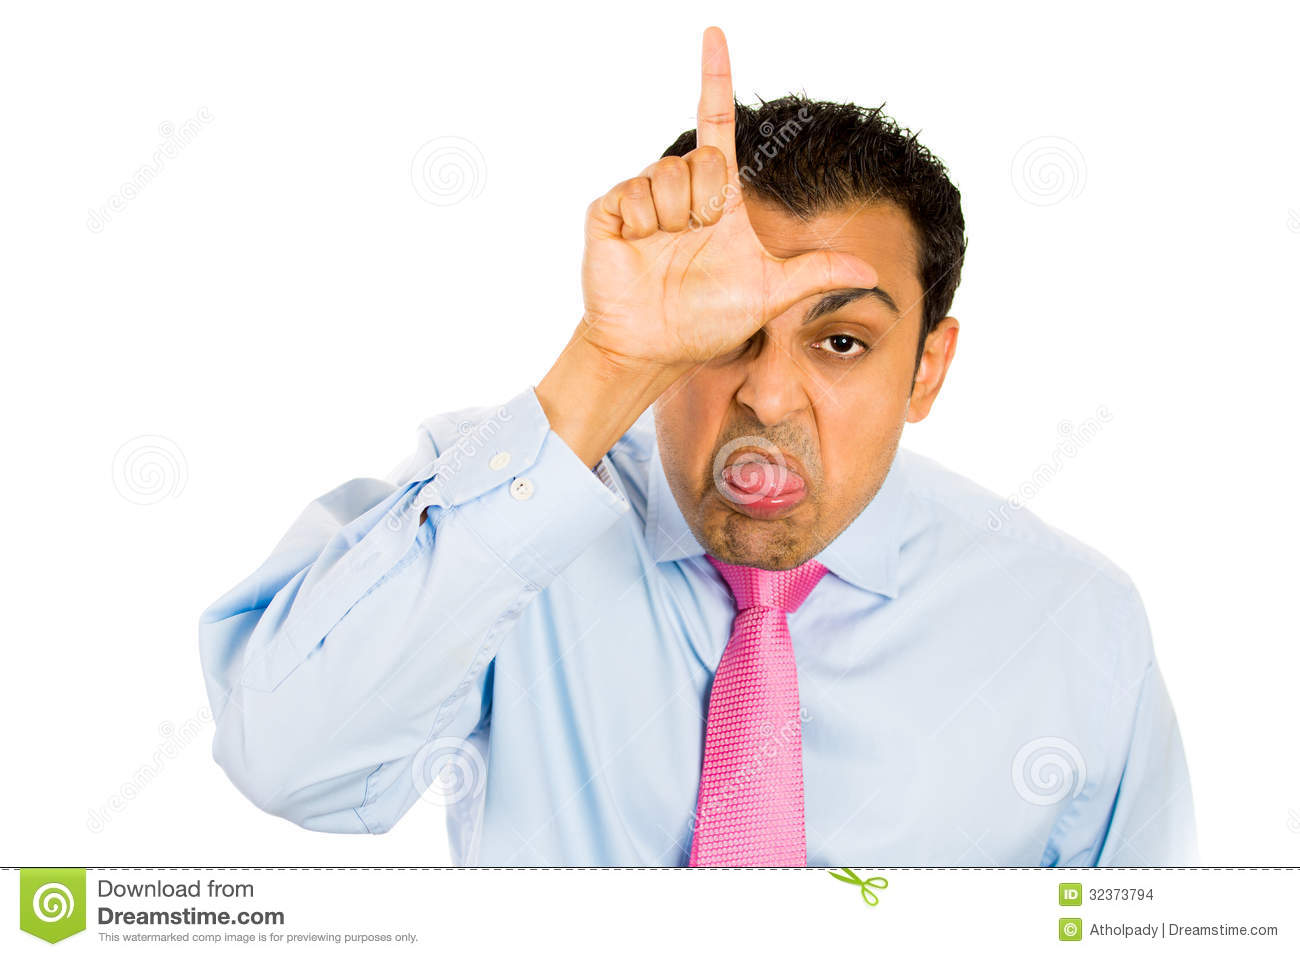 Closeup Portrait Of Funny Man Displaying A Loser Sign On His Forehead